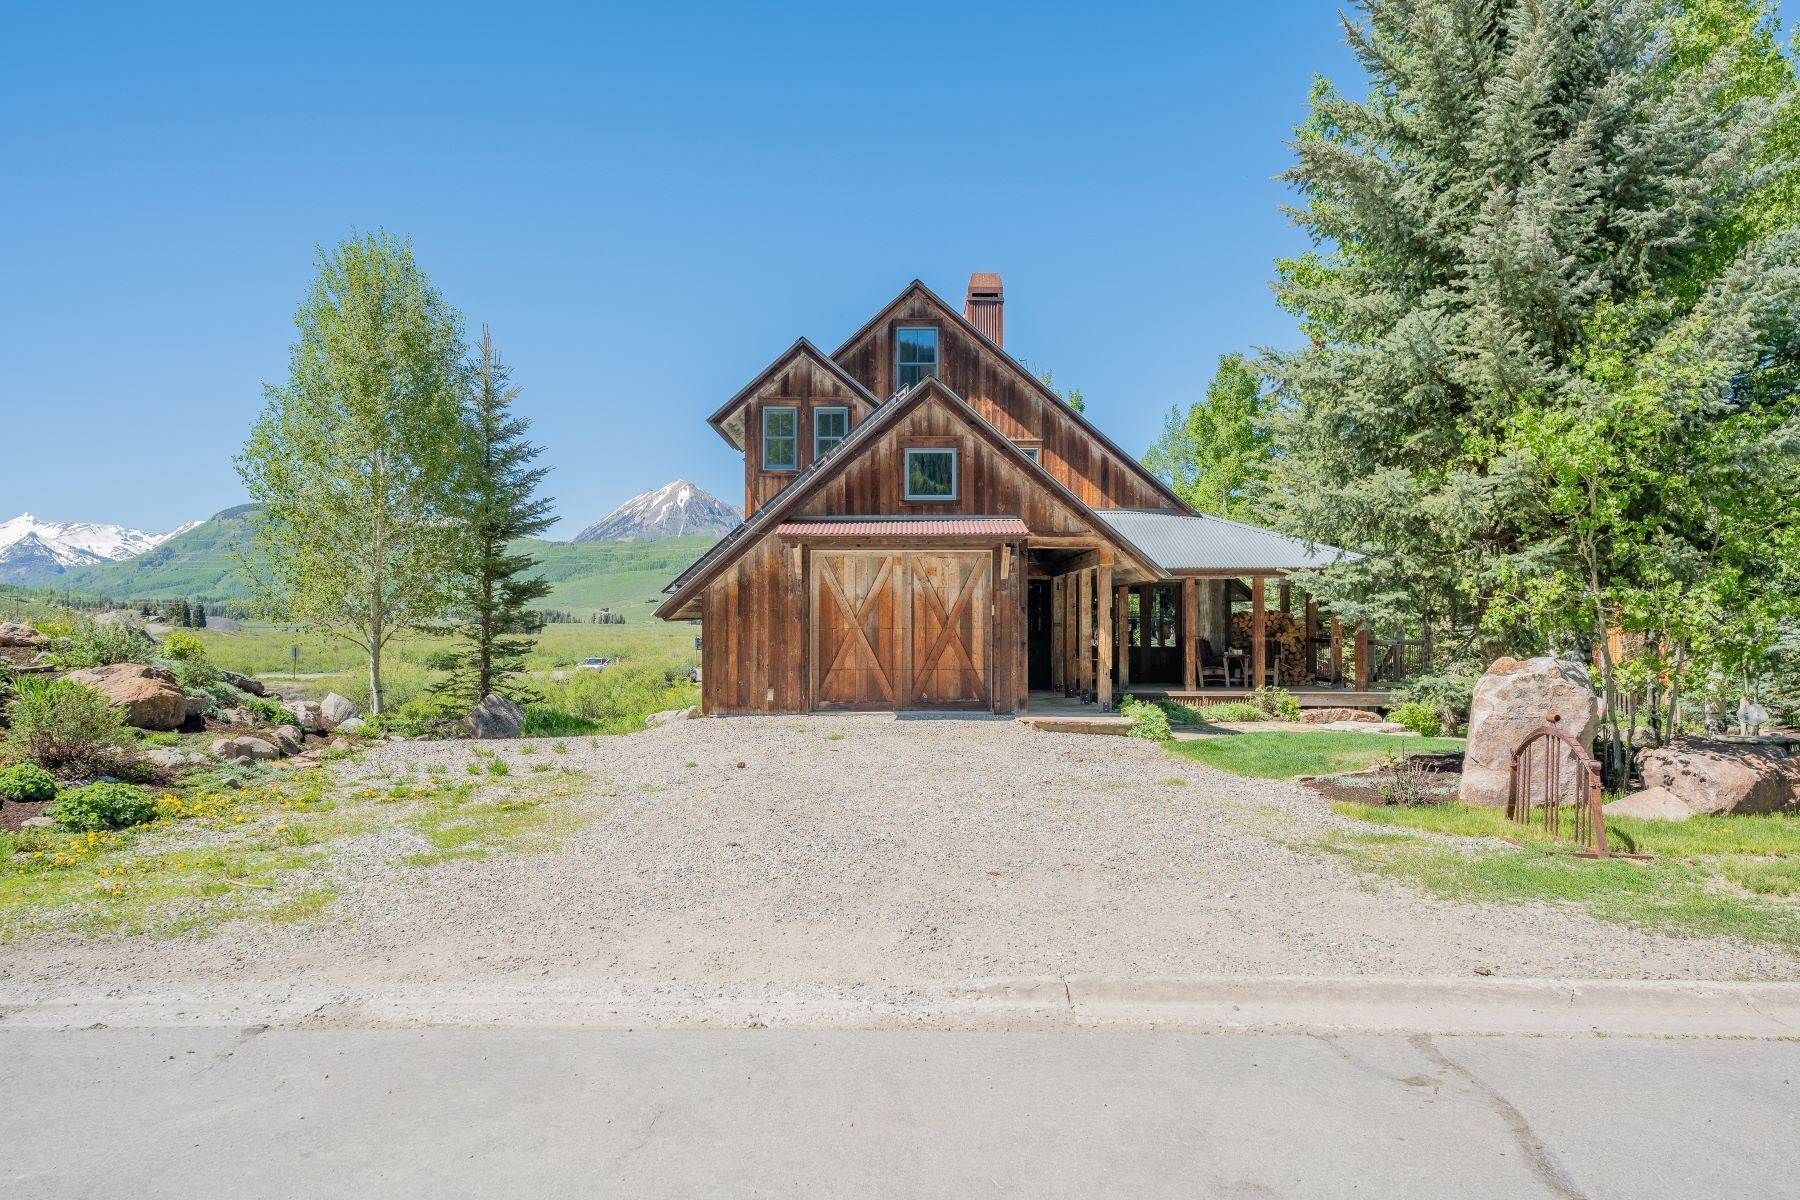 Single Family Homes for Sale at One-Of-A-Kind Property That Cannot Be Replicated In The Town of Crested Butte 1 Teocalli Avenue Crested Butte, Colorado 81224 United States